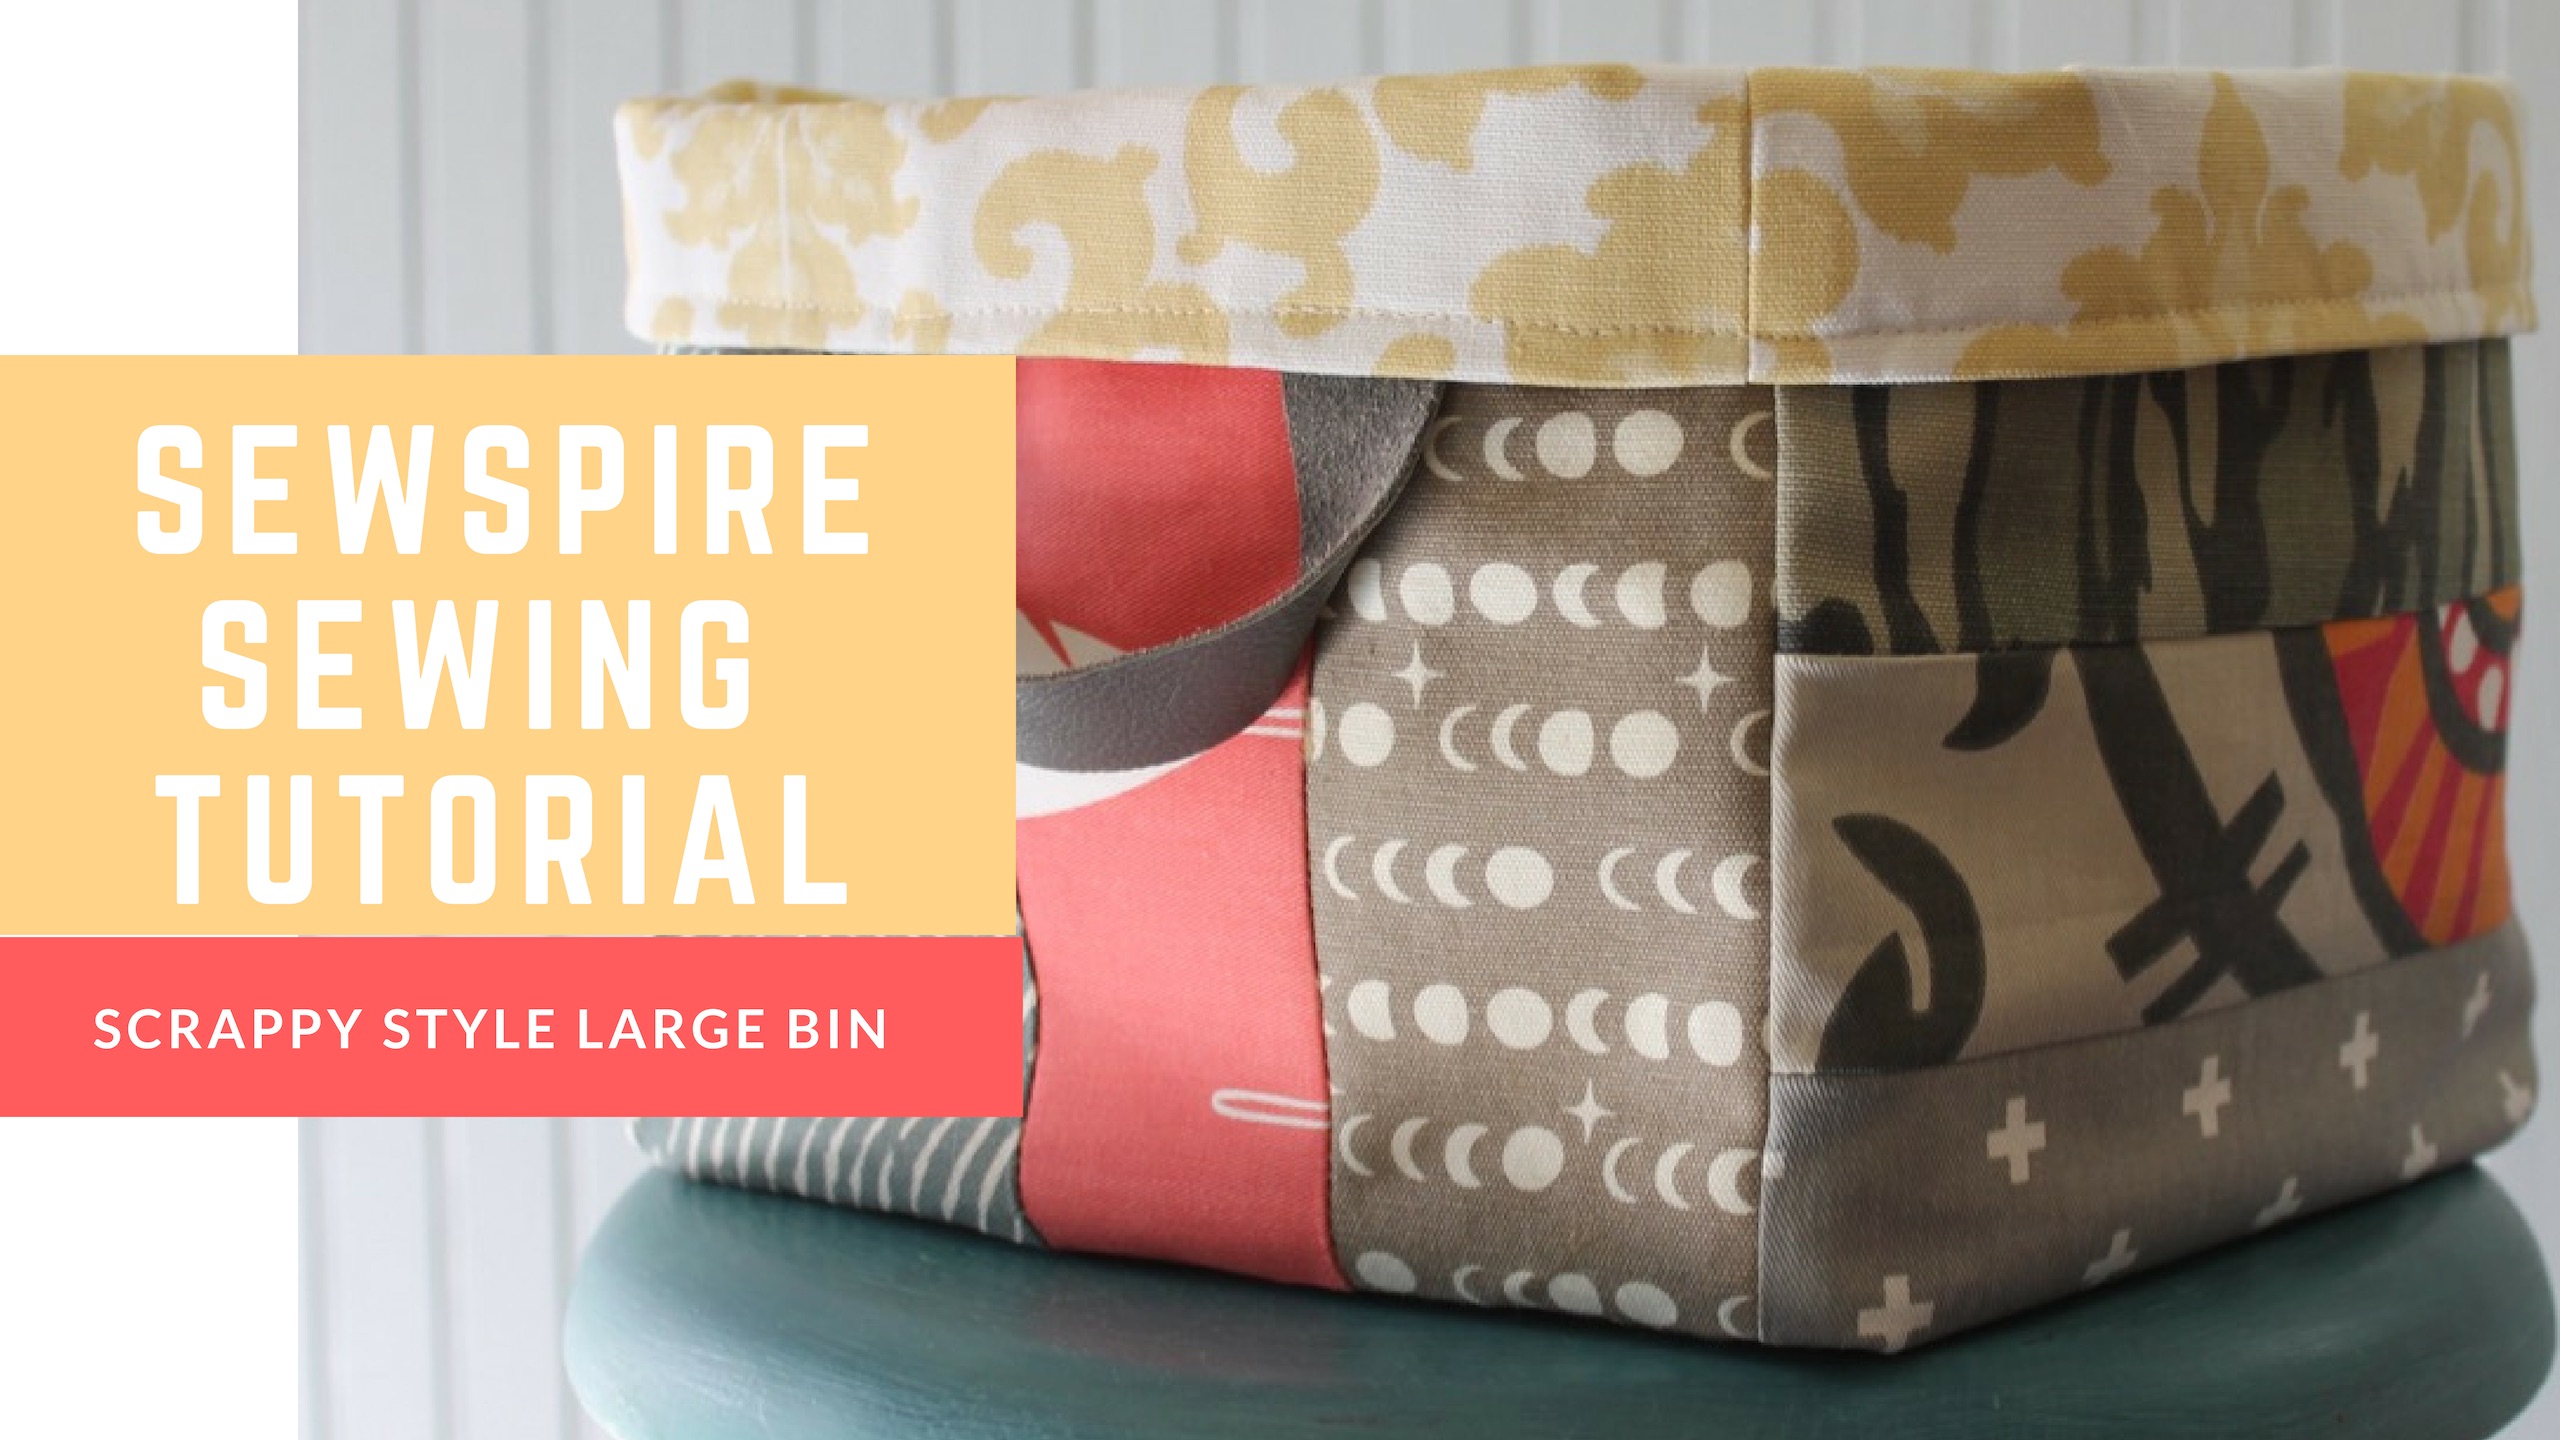 How to Sew a Large Scrappy Style Bin